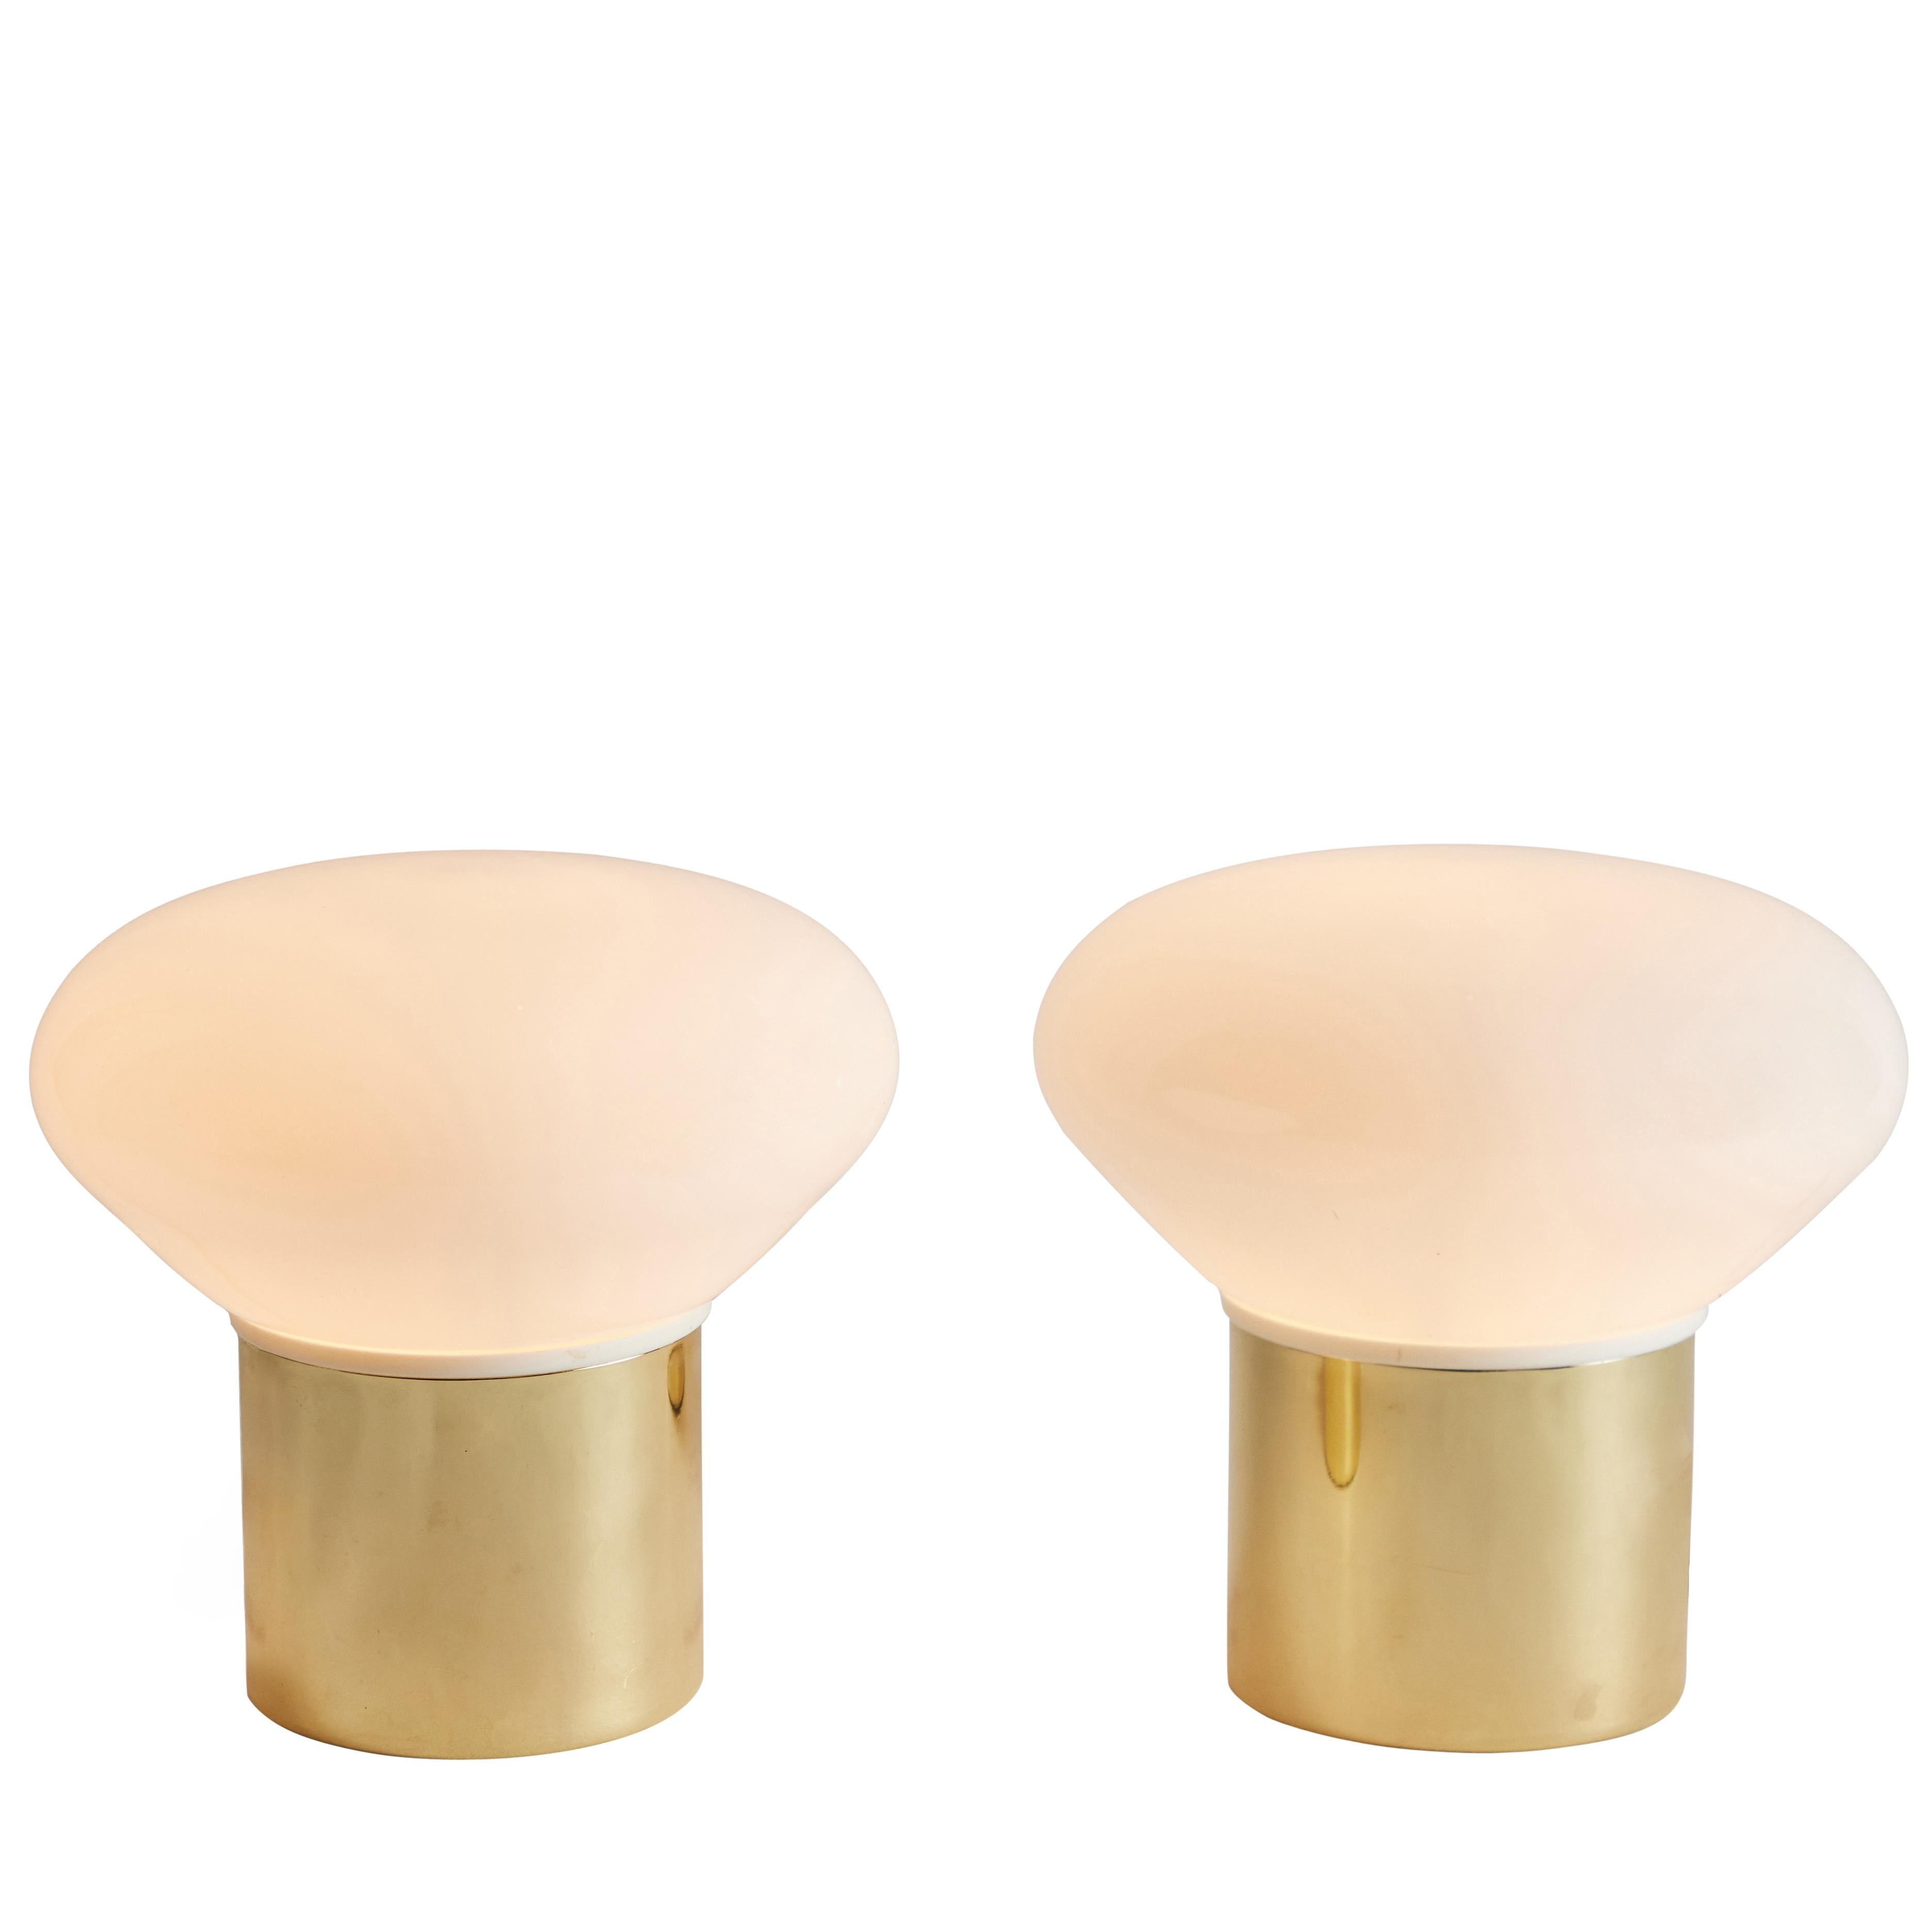 Pair of 1970s Italian glass & metal 'porcini' table lamps attributed to Tronconi. Executed in opaline glass and metal. A surprisingly simple and refined design.

Tronconi was a major Italian lighting and design company founded by Enrico Tronconi.